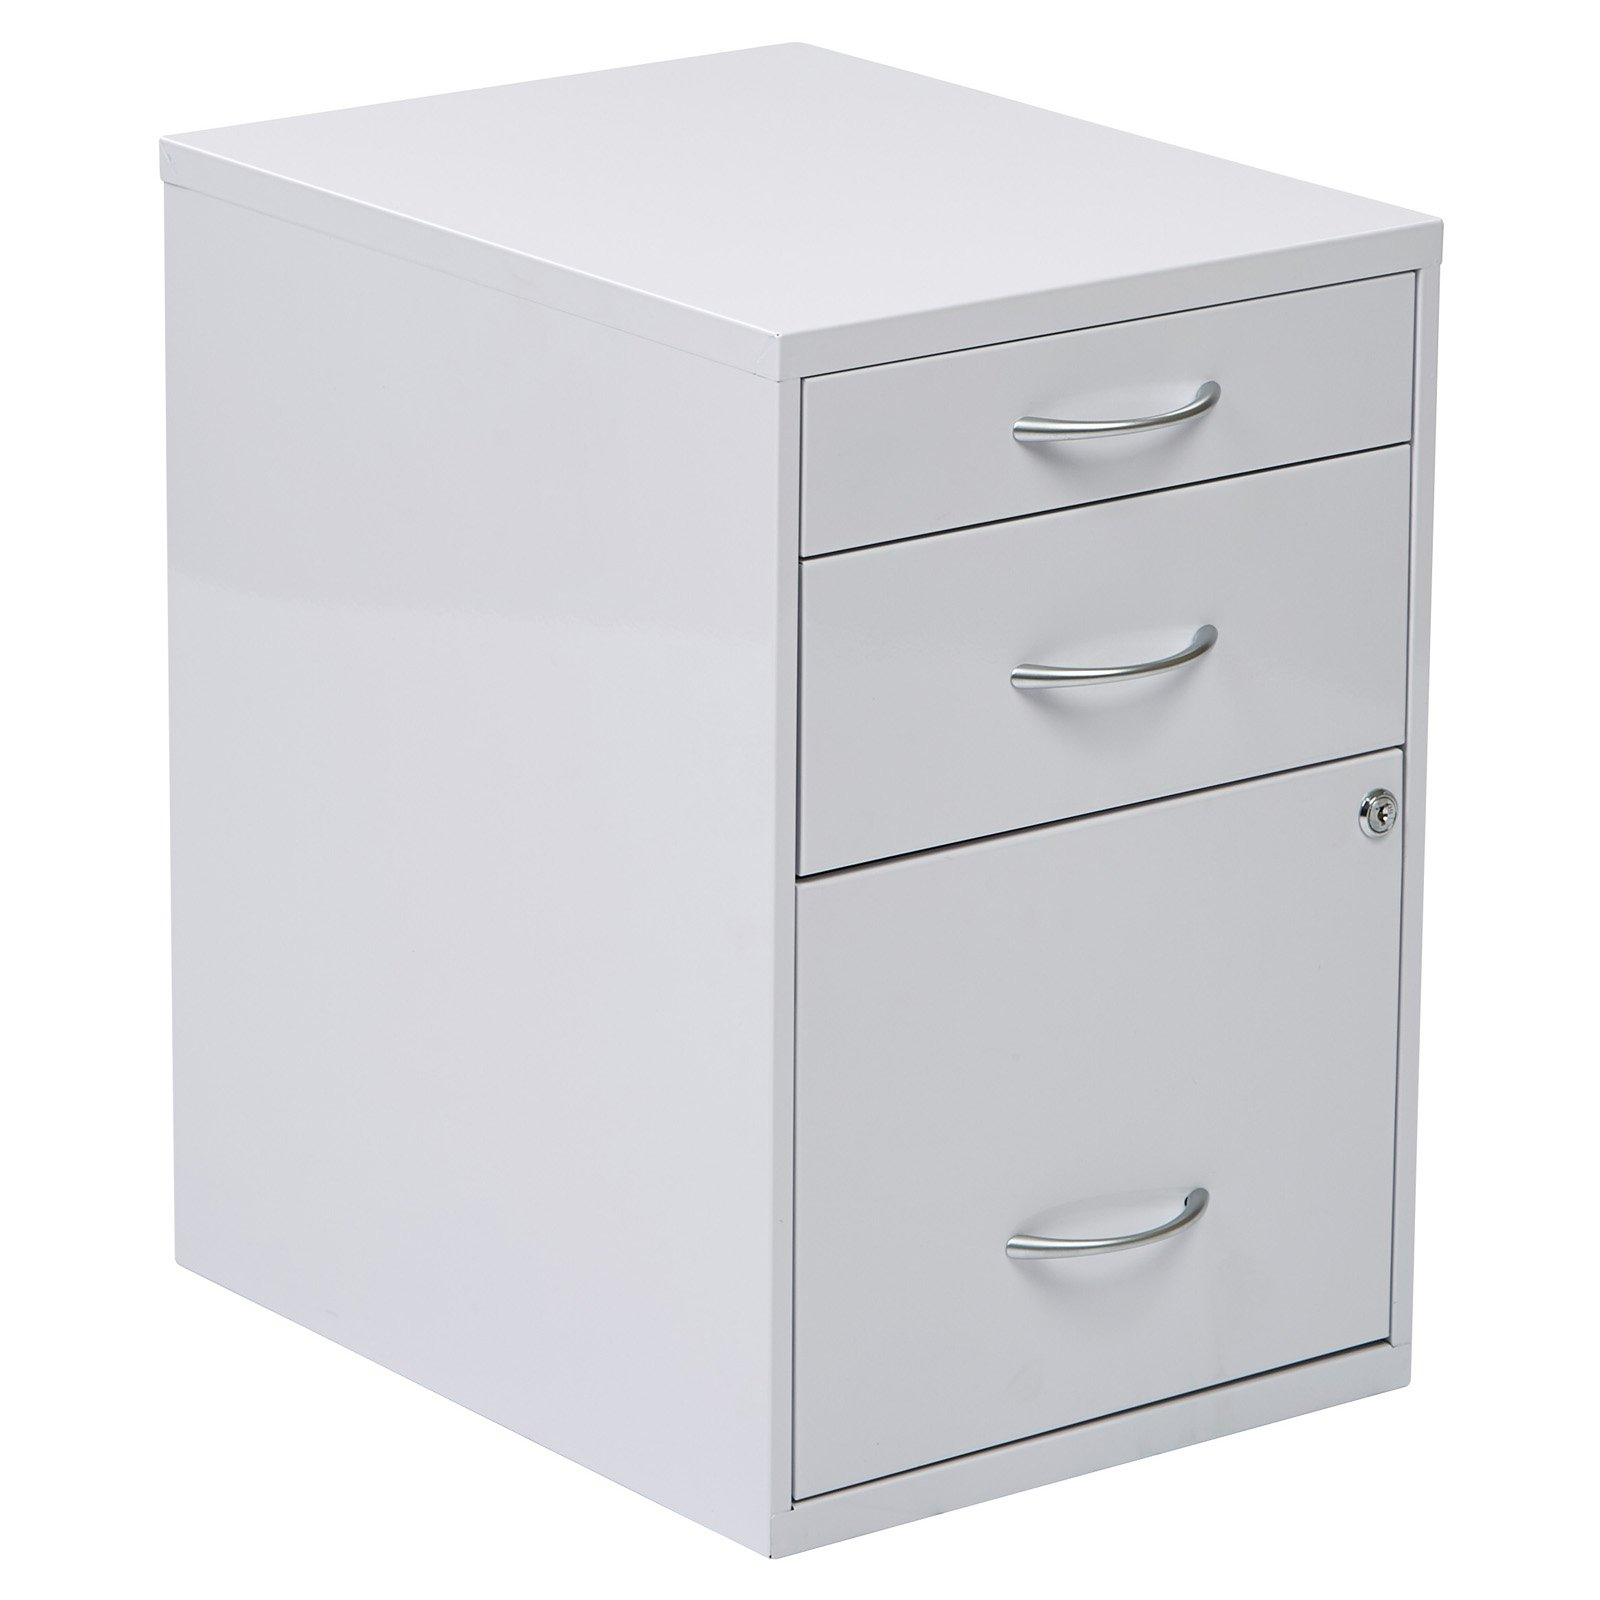 Osp Designs 3 Drawer Vertical Metal Lockable Filing Cabinet White in dimensions 1600 X 1600